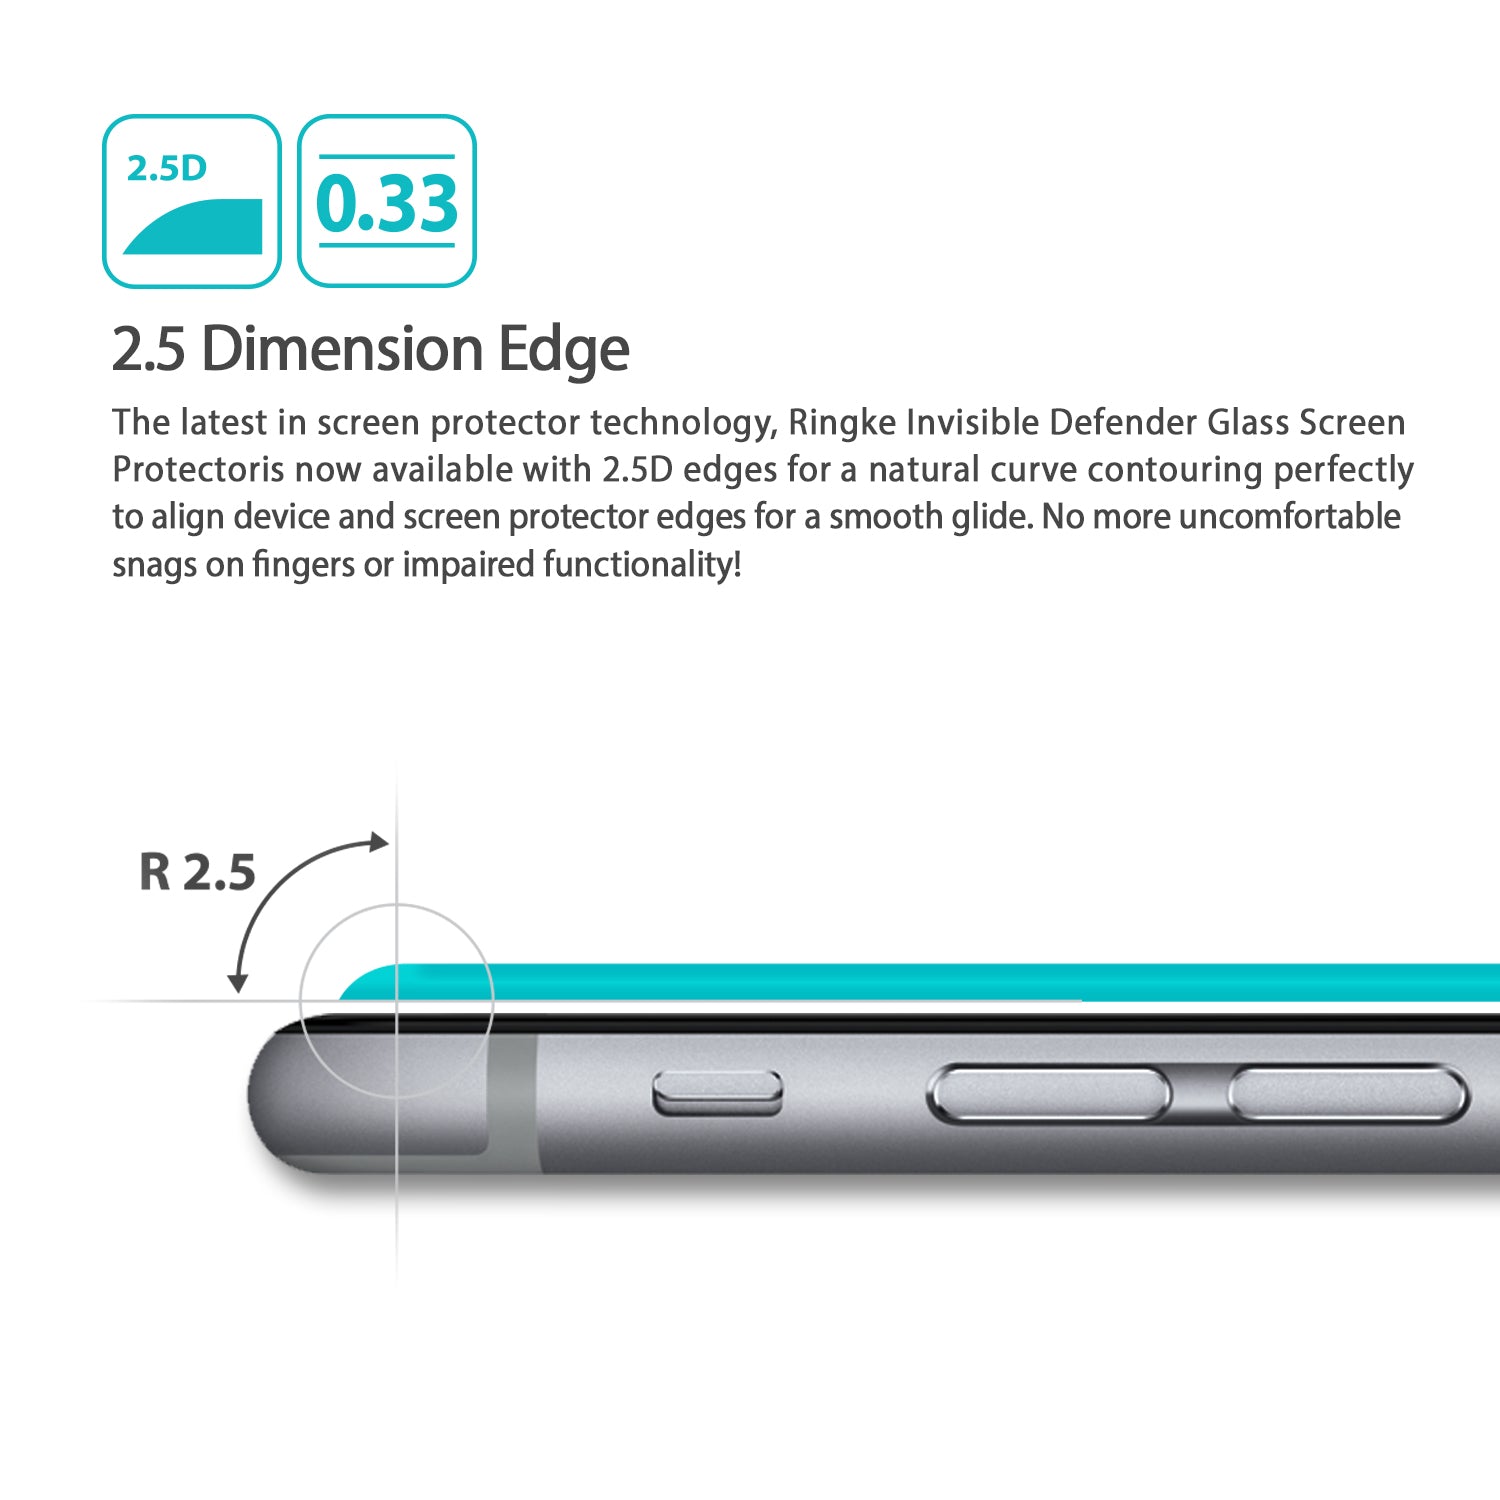 2.5 dimension edge with 0.33mm slim thickness